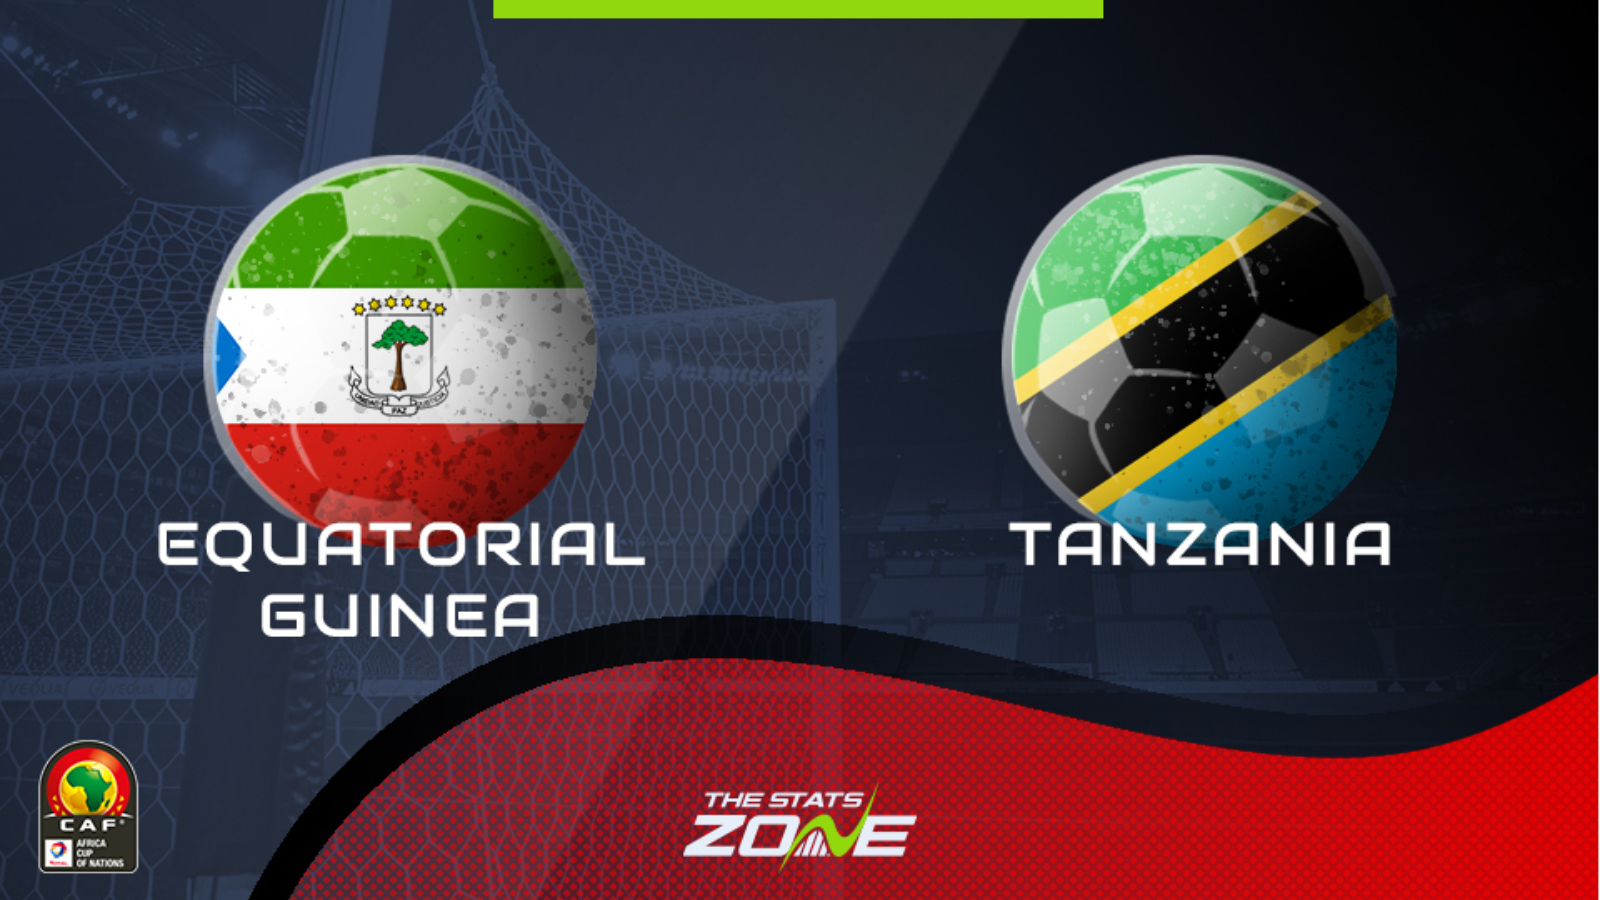 2022 Africa Cup of Nations Qualifiers Equatorial Guinea vs Tanzania